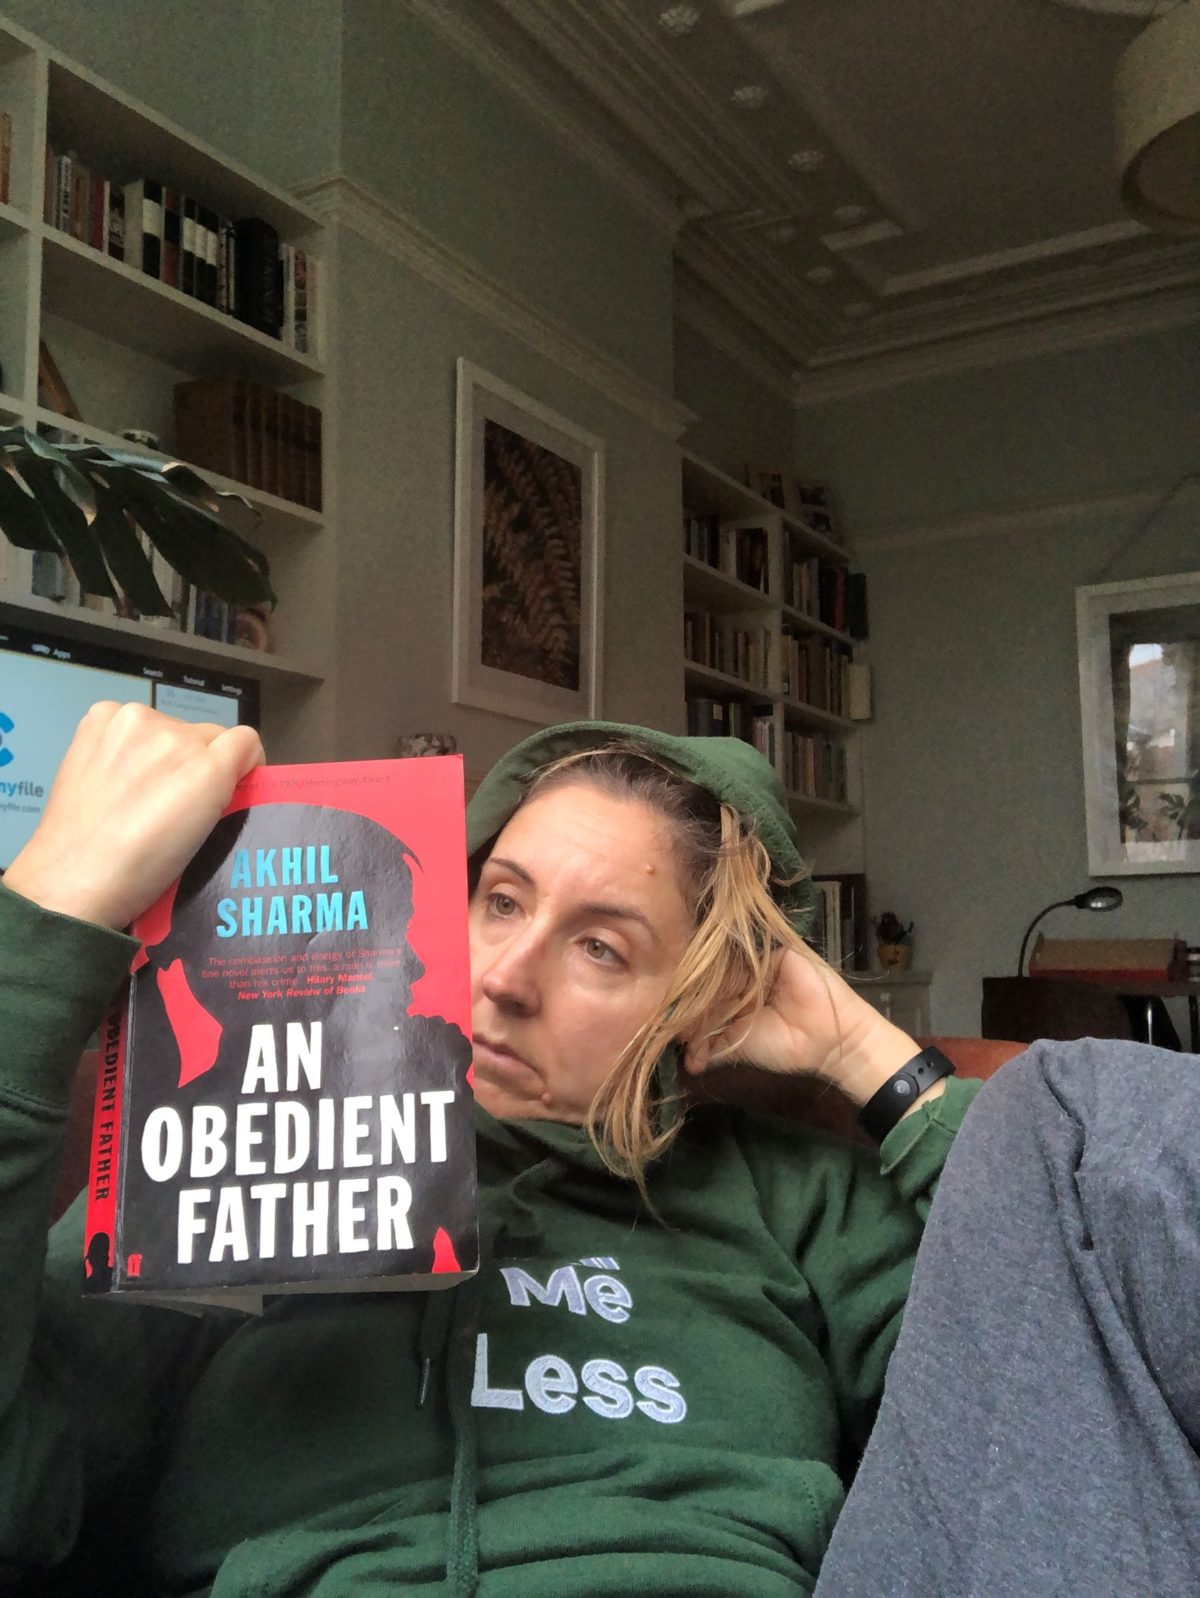 obedient father by akhil sharma